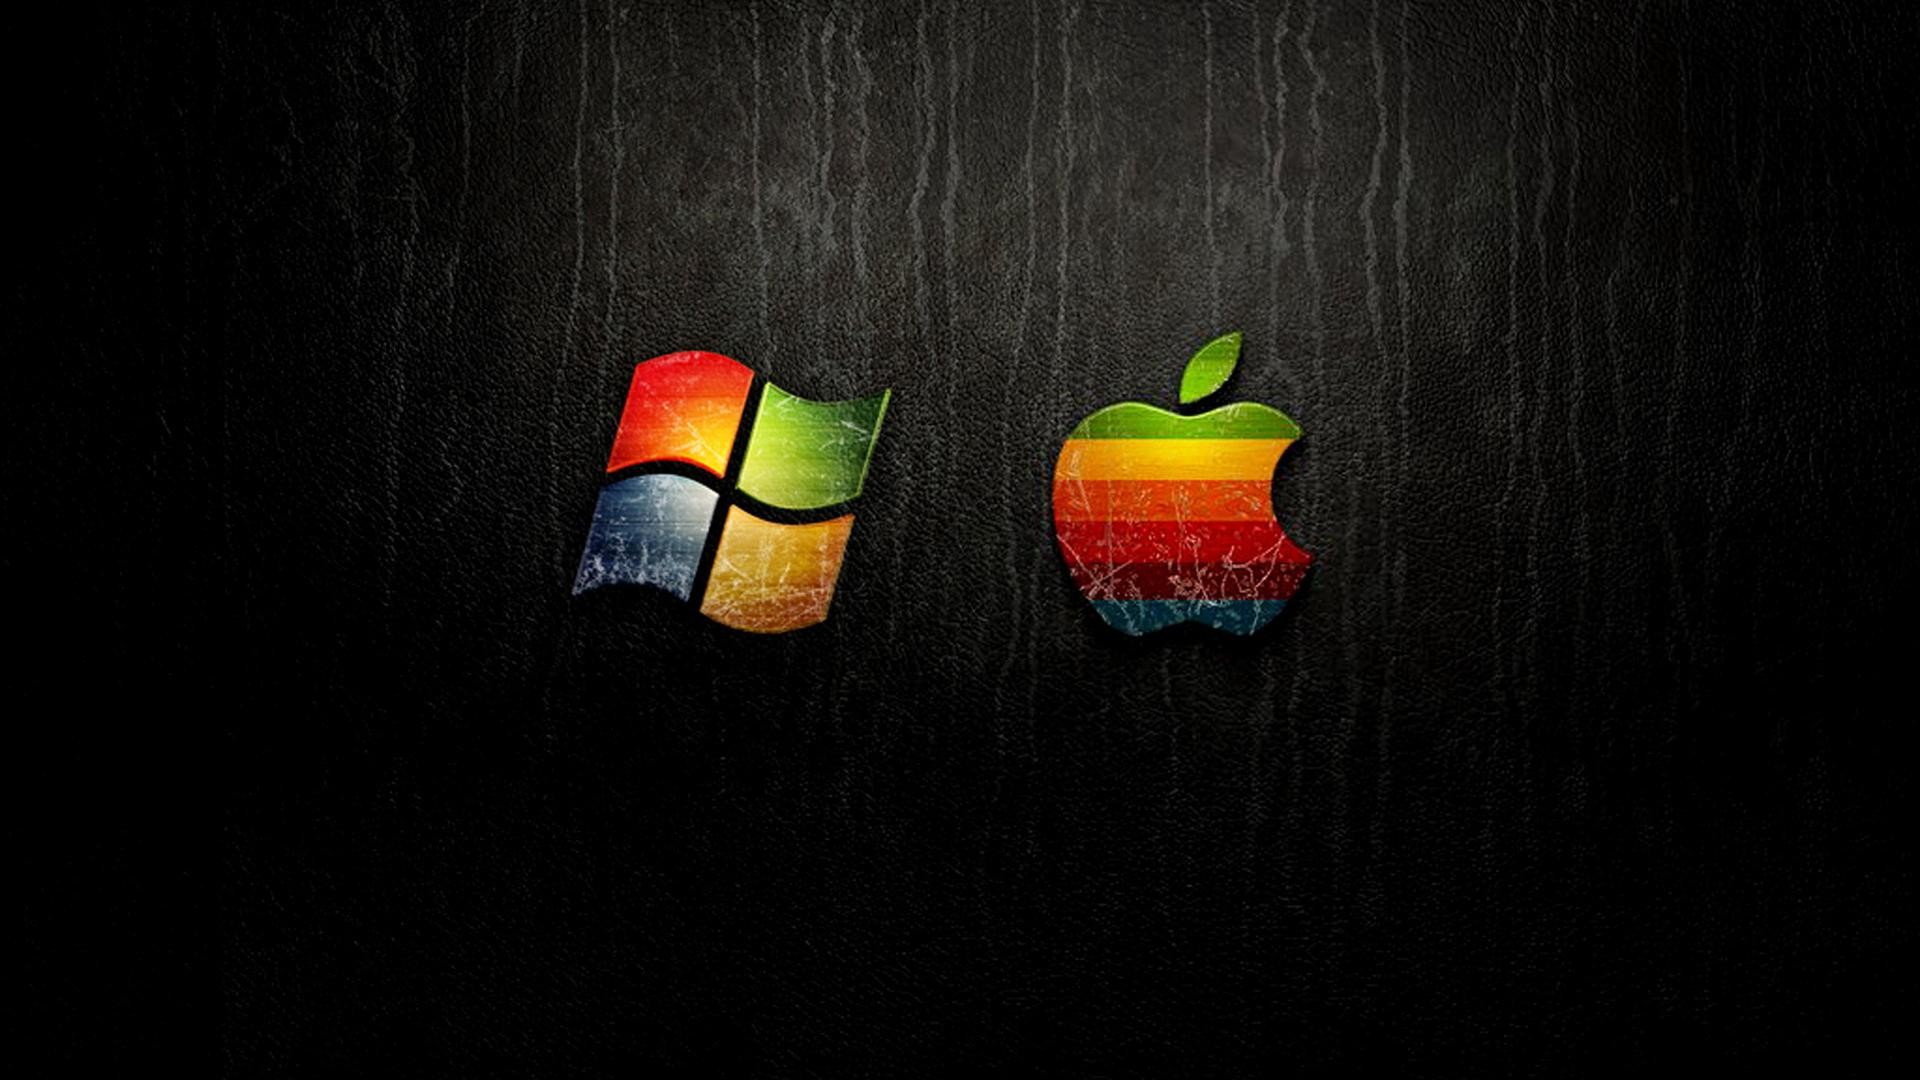 1920x1080 Free Hd Colorful Windows And Apple Wallpaper Background For Desktop